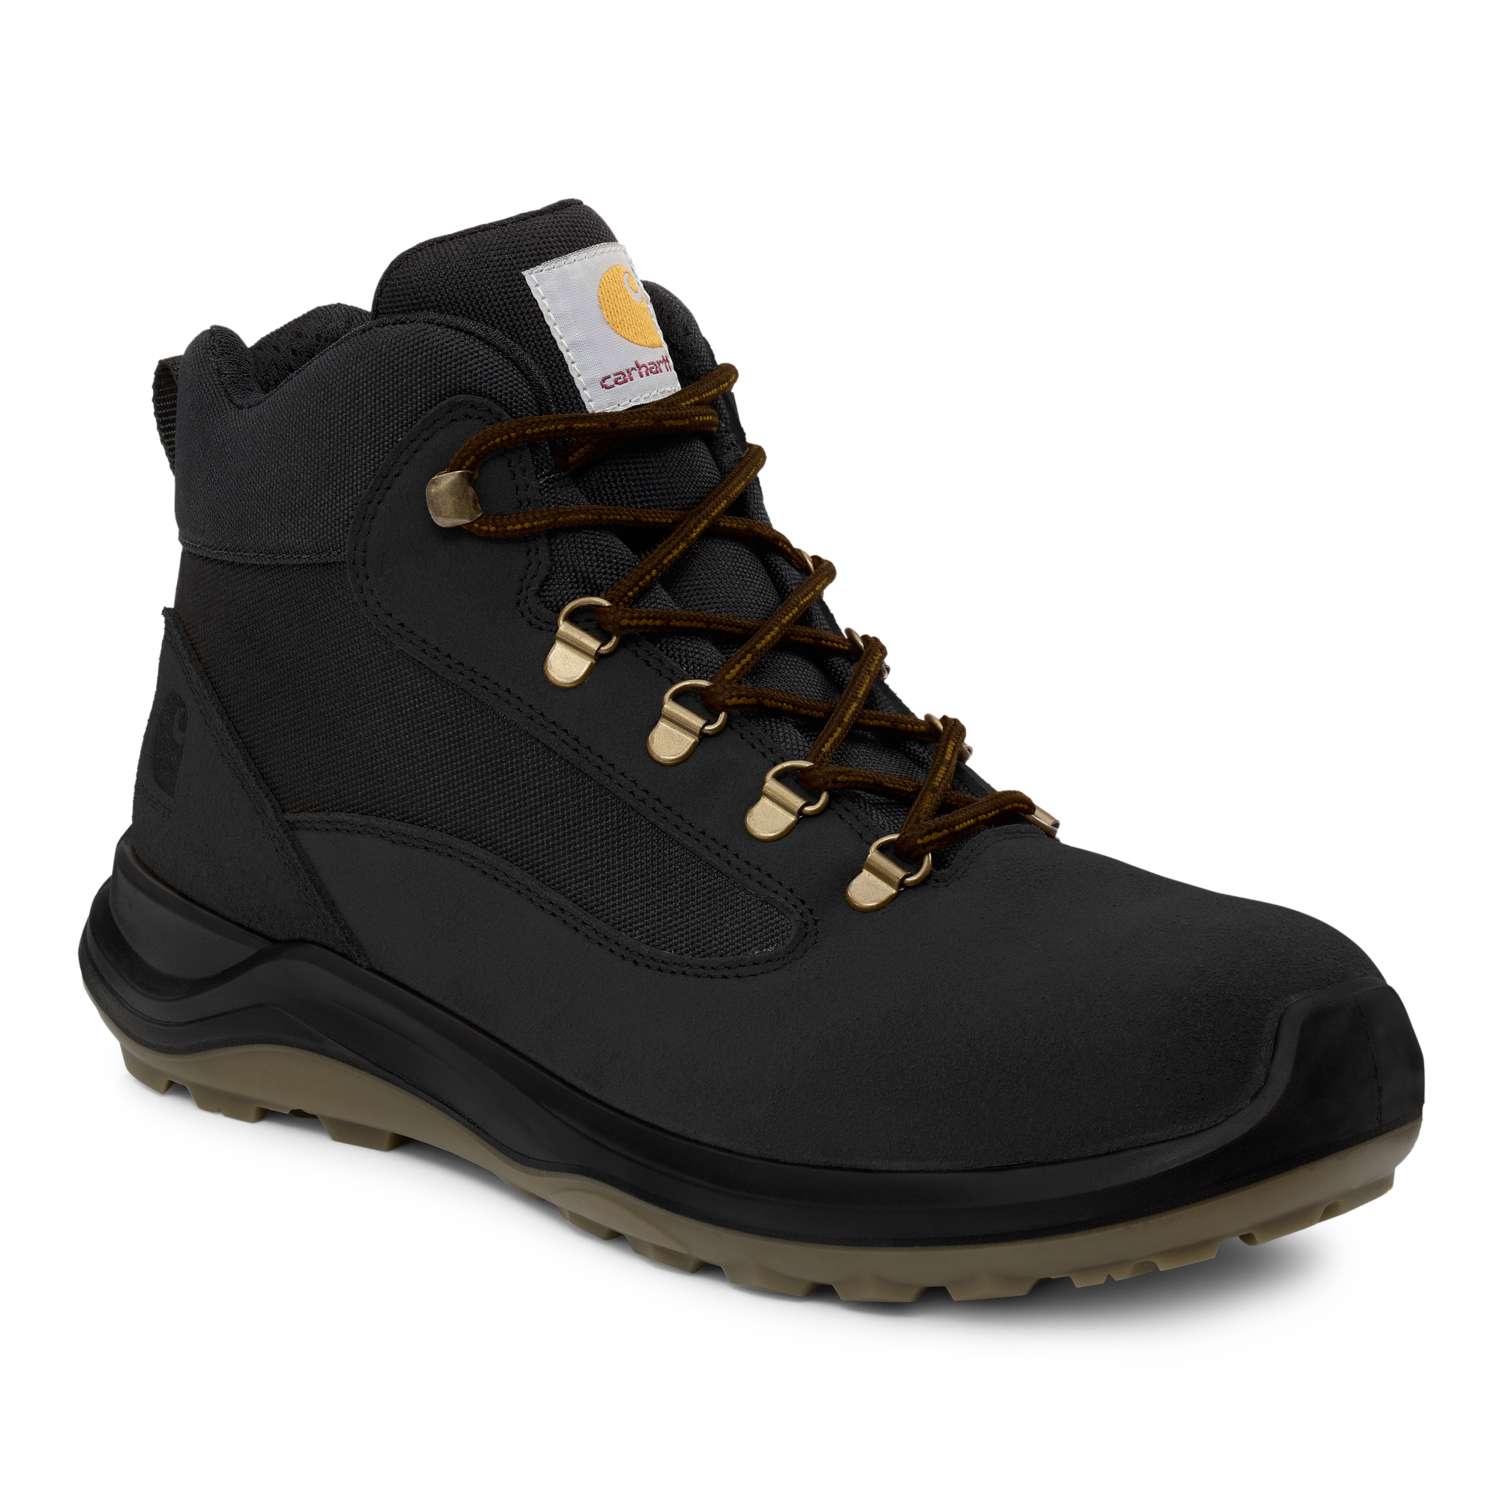 BELMONT_RUGGED_S3L_SAFETY_BOOT_rRLDJia2aD